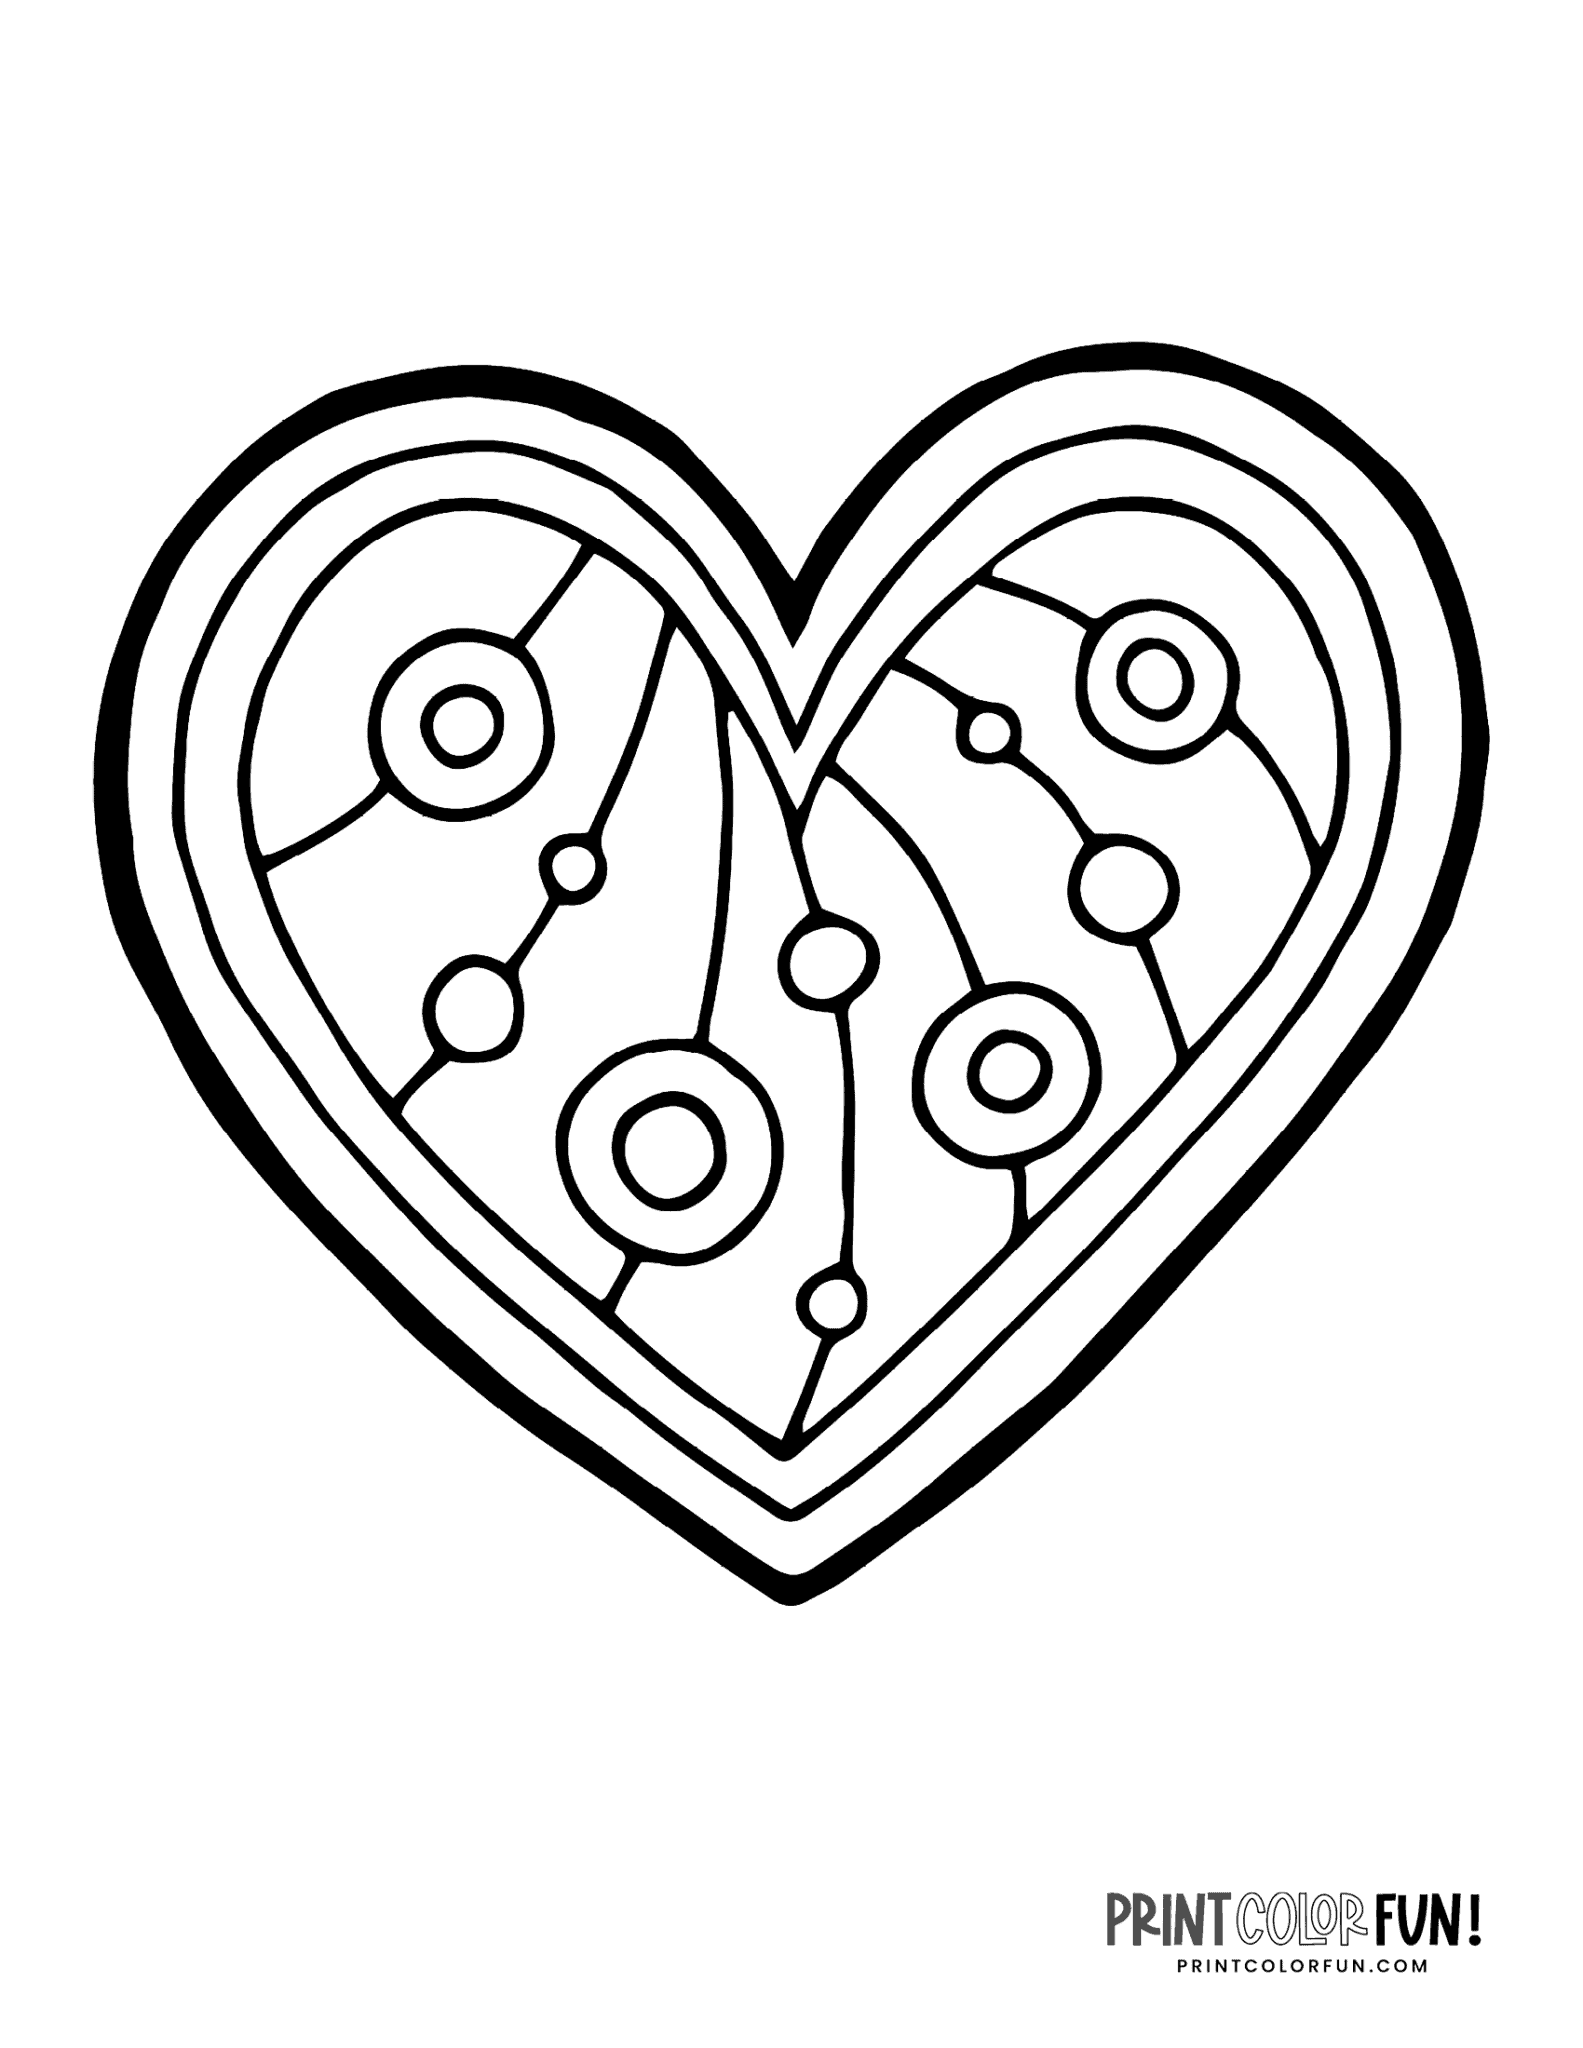 100+ heart coloring pages: A huge collection of free Valentine's Day